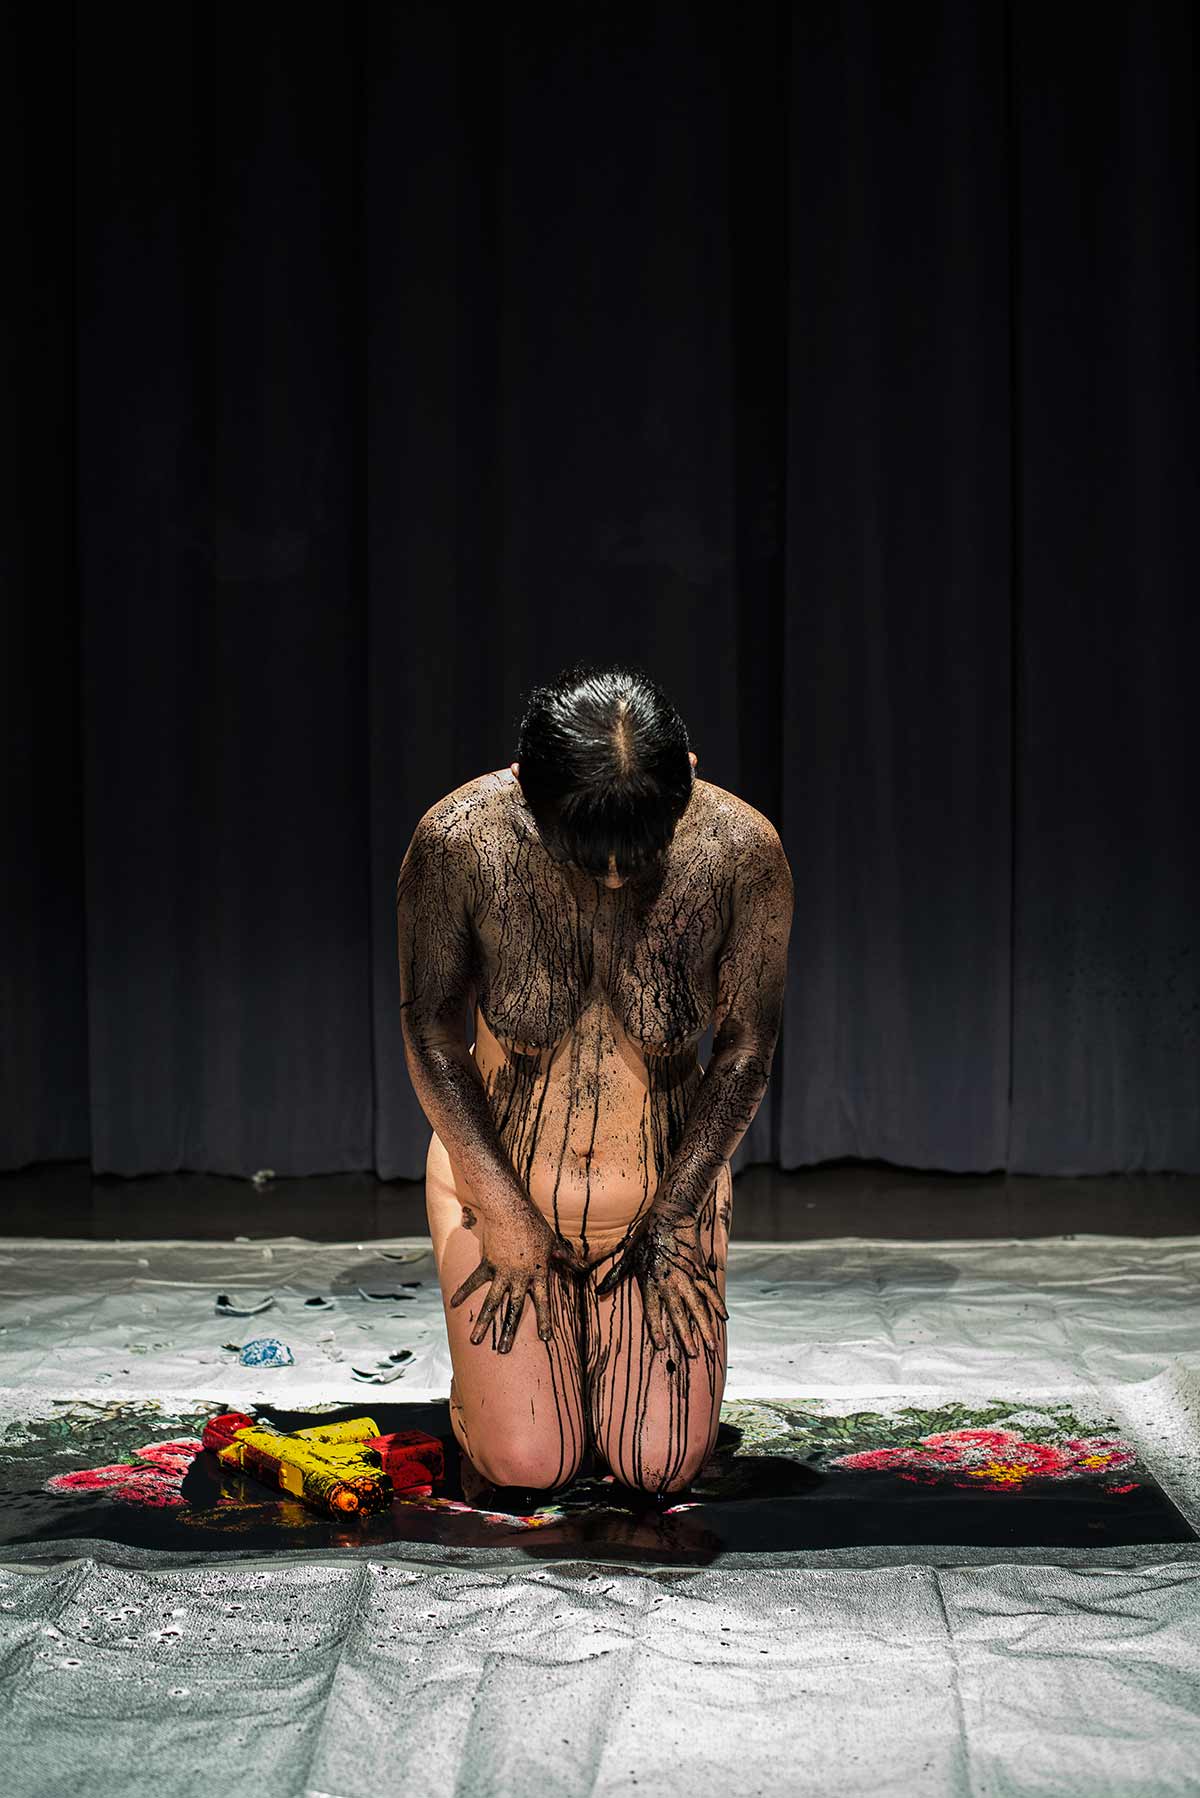 Chun Hua Catherine Dong's performance at MANIFEST! Choreographing Social Movements in the Americas 2014: she kneed on a Chinese painting, her body was full of ink, and she bowed